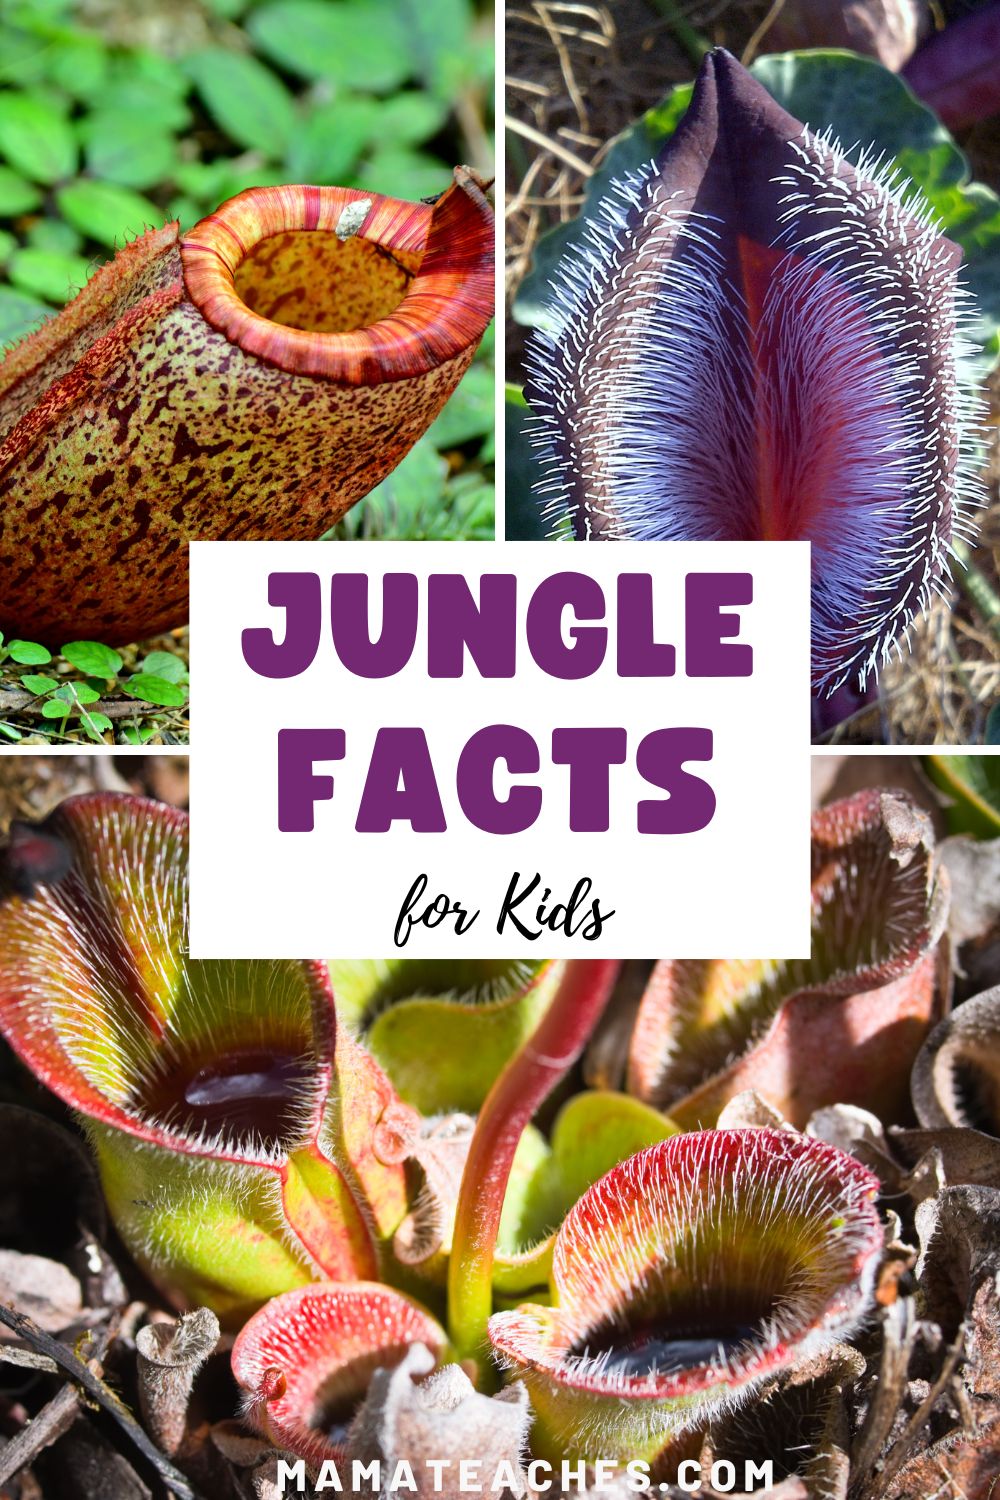 Jungle Facts for Kids